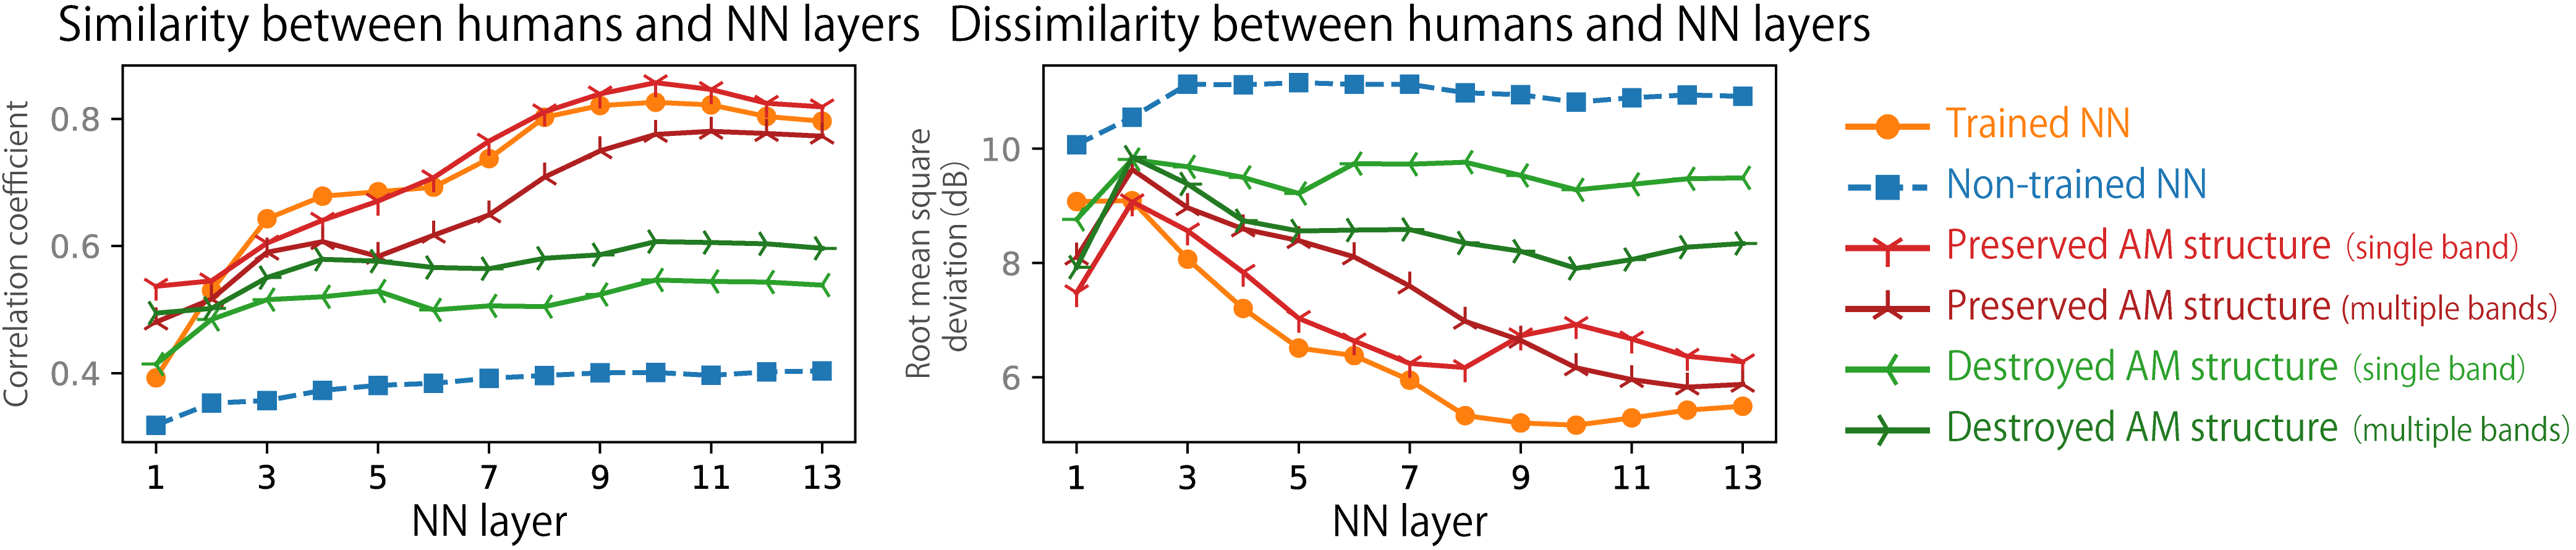 Figure 3 Similarity (left) and dissimilarity (right) of AM detection thresholds for humans and NN layers. Each line shows the NN trained on natural sounds, the non-trained NN, the NN trained with sounds that preserve natural AM patterns, and the NN trained on sounds with unnatural AM patterns.